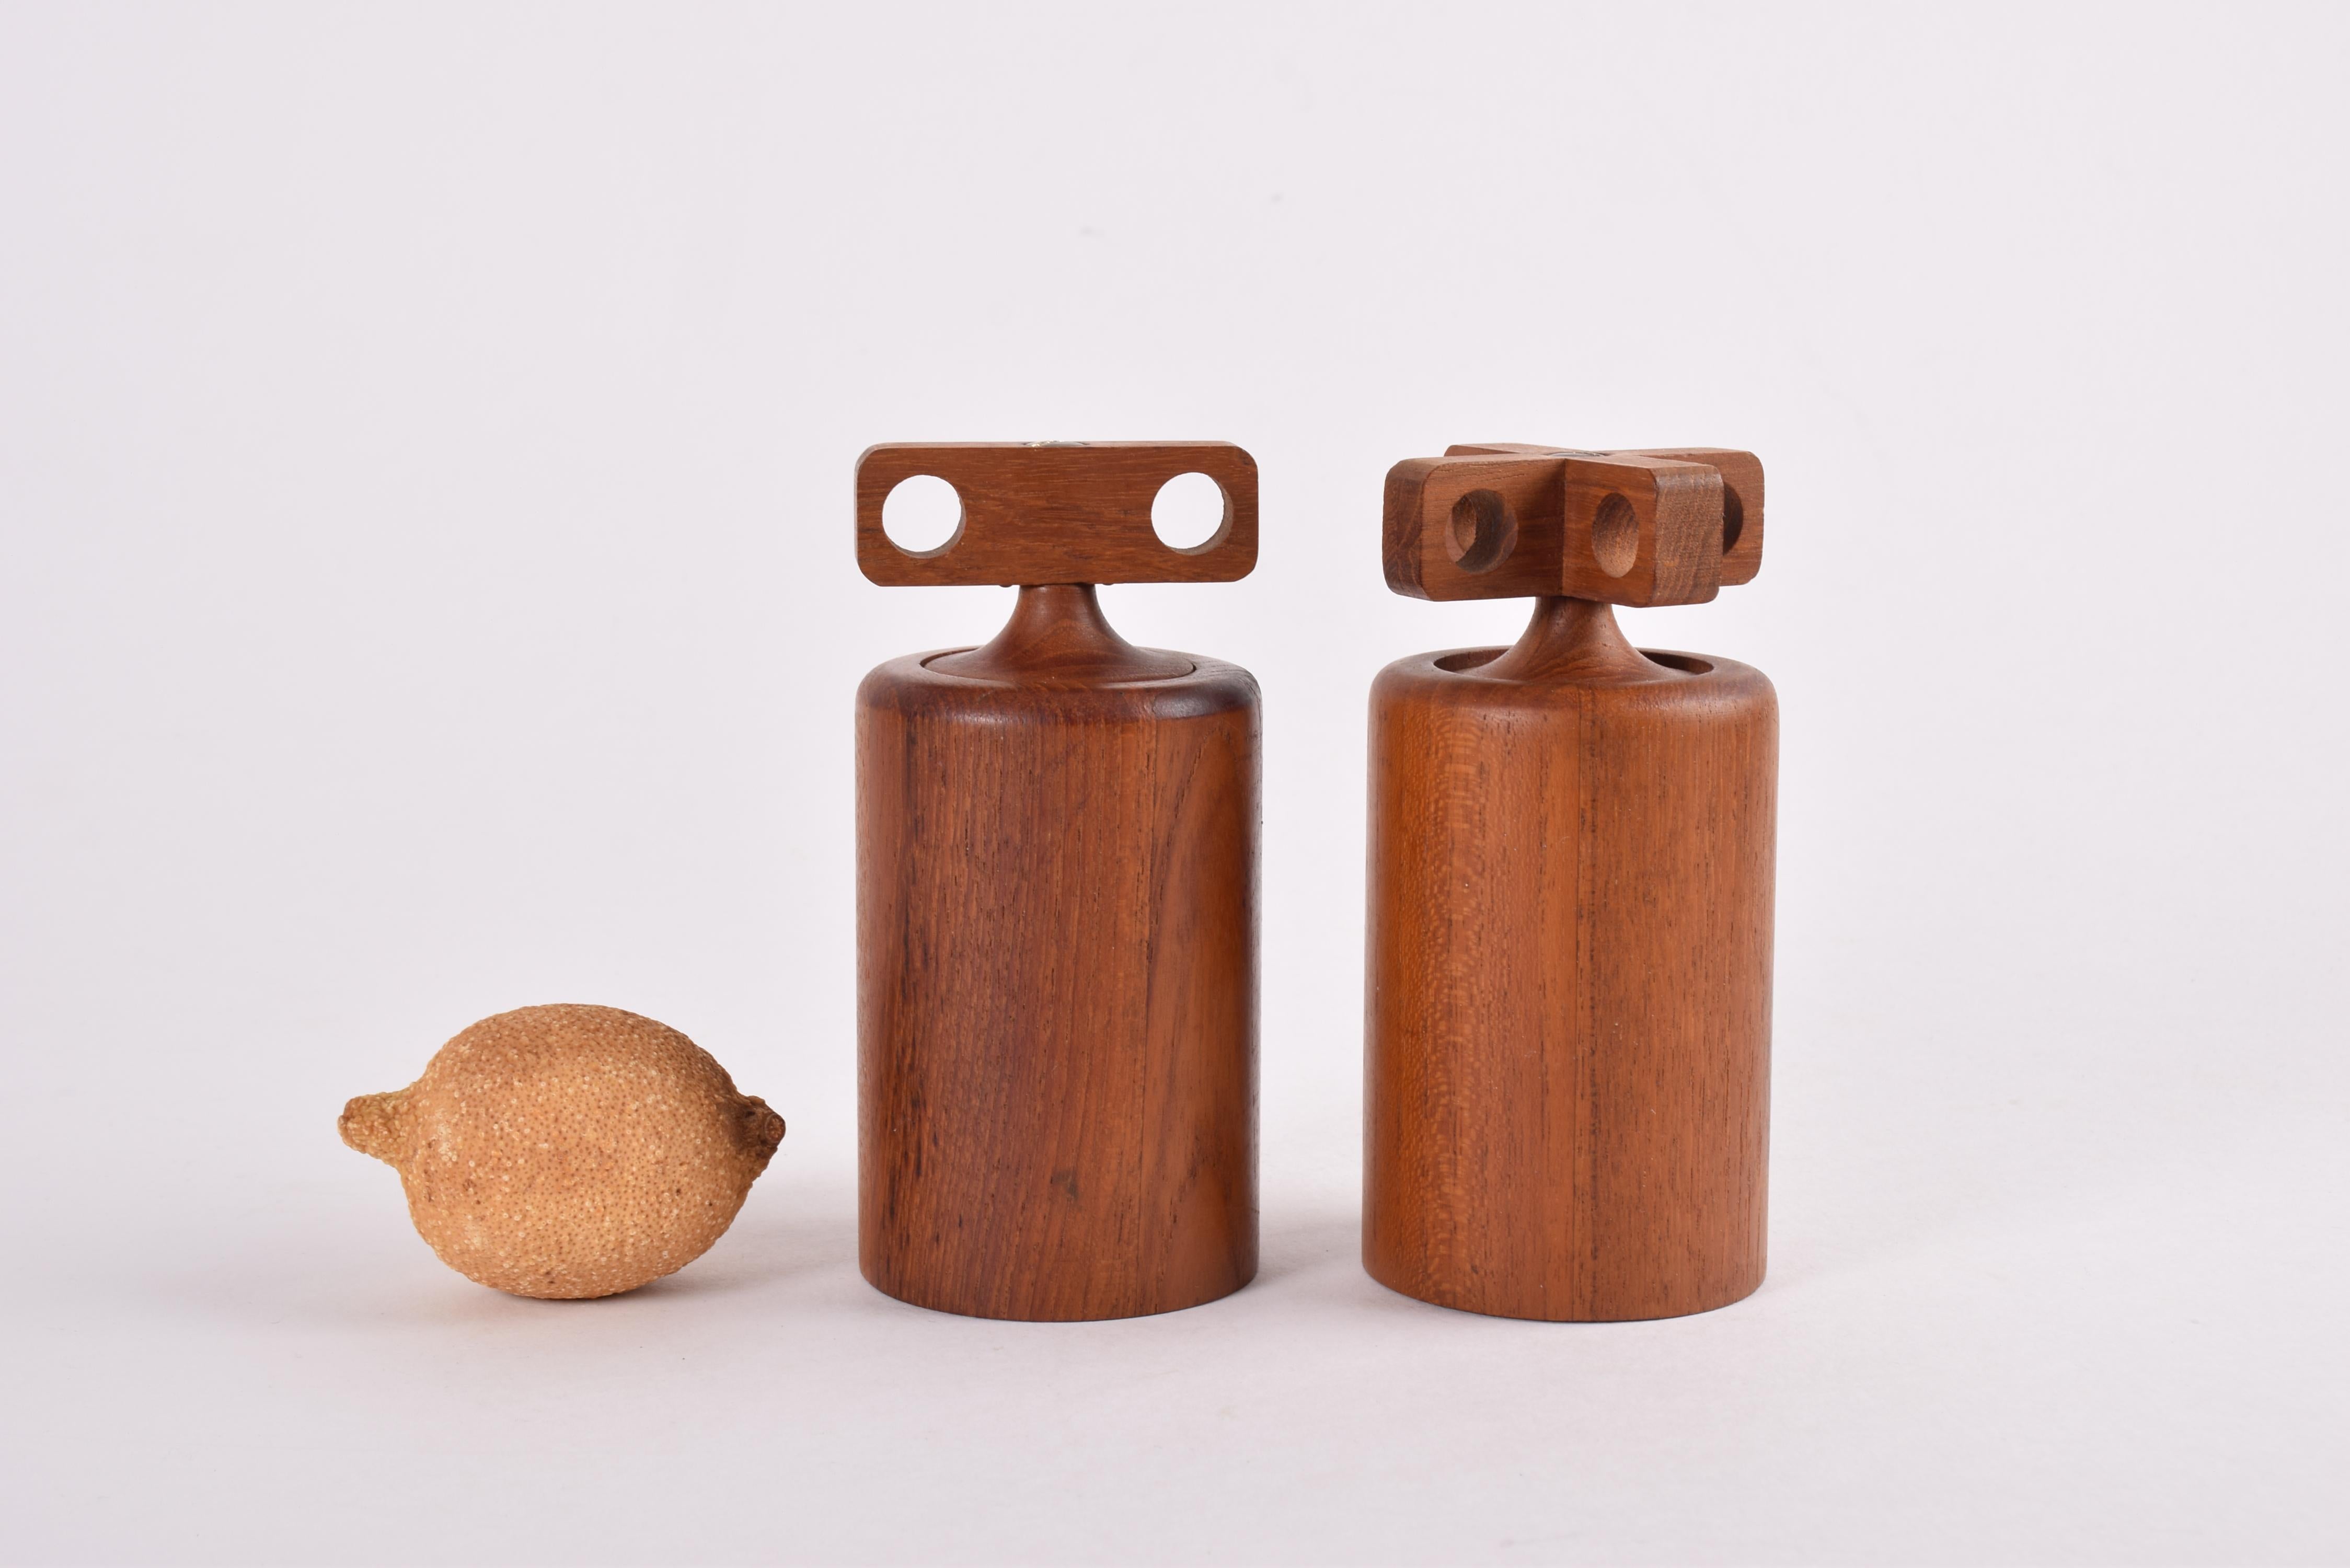 Danish Midcentury Modern salt & pepper mill set by Birgit Krogh for Woodline, Denmark. Designed and made 1950s to 60s.

The set is made from teak and has a brass screw on top of the handles.

Marked on bottom Woodline BK ©

Very good vintage